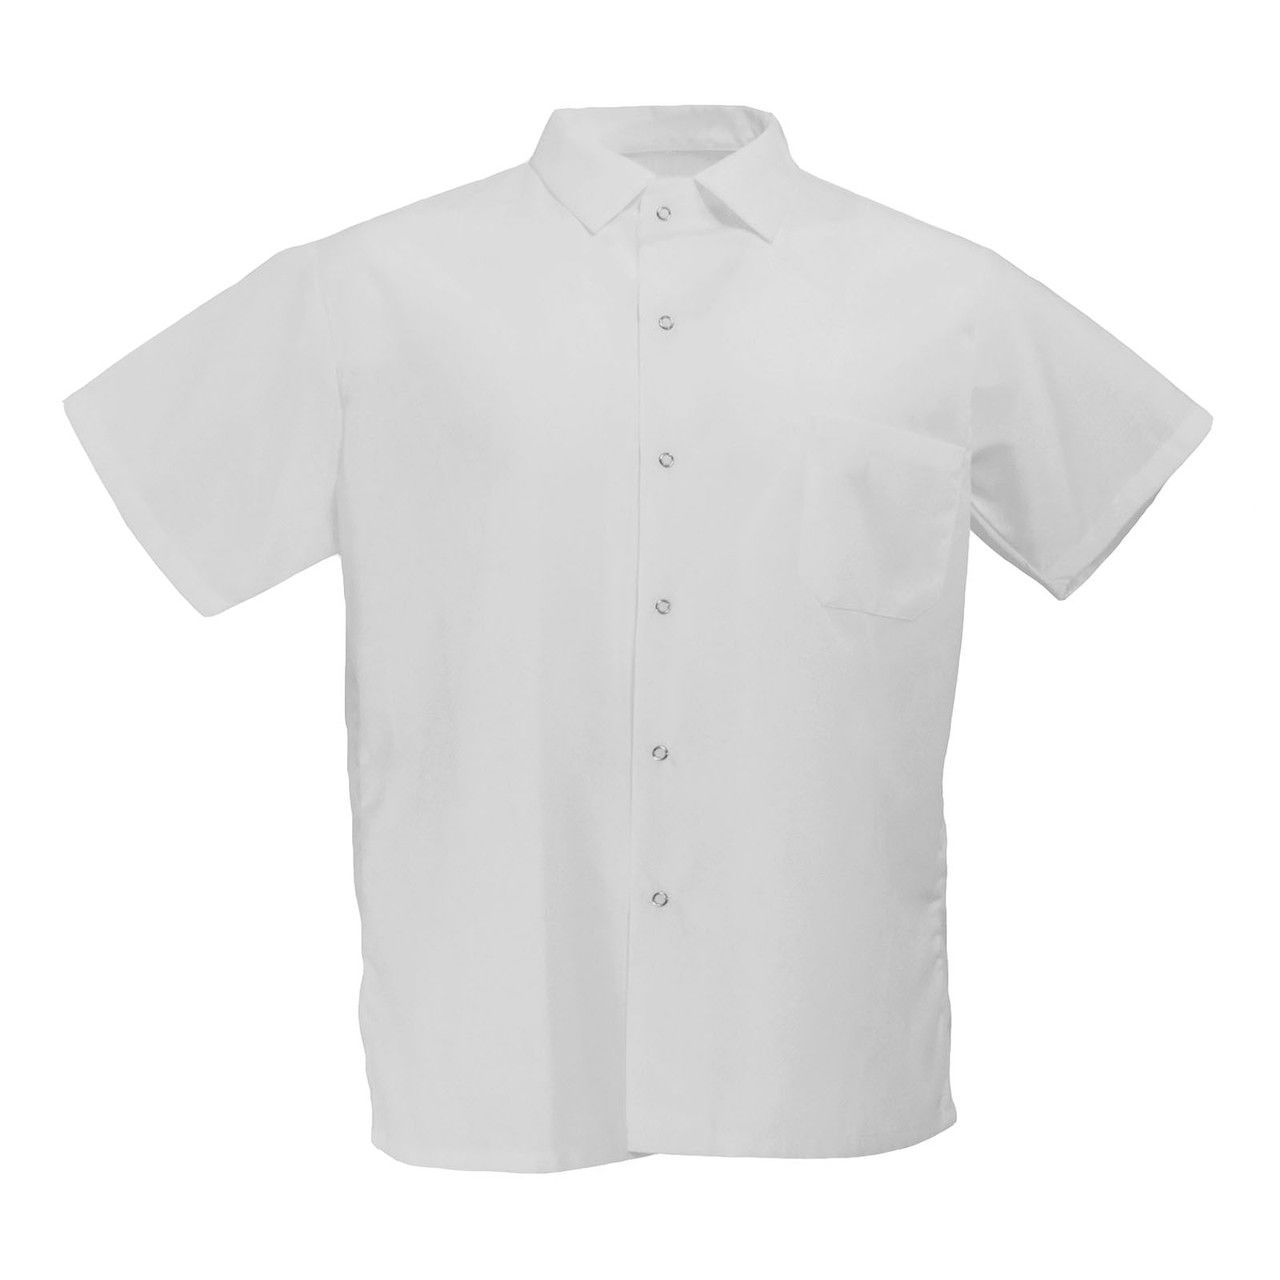 Can you identify the chef white shirts being referred to as 'Chef Trend S102 White Cook Shirt'?